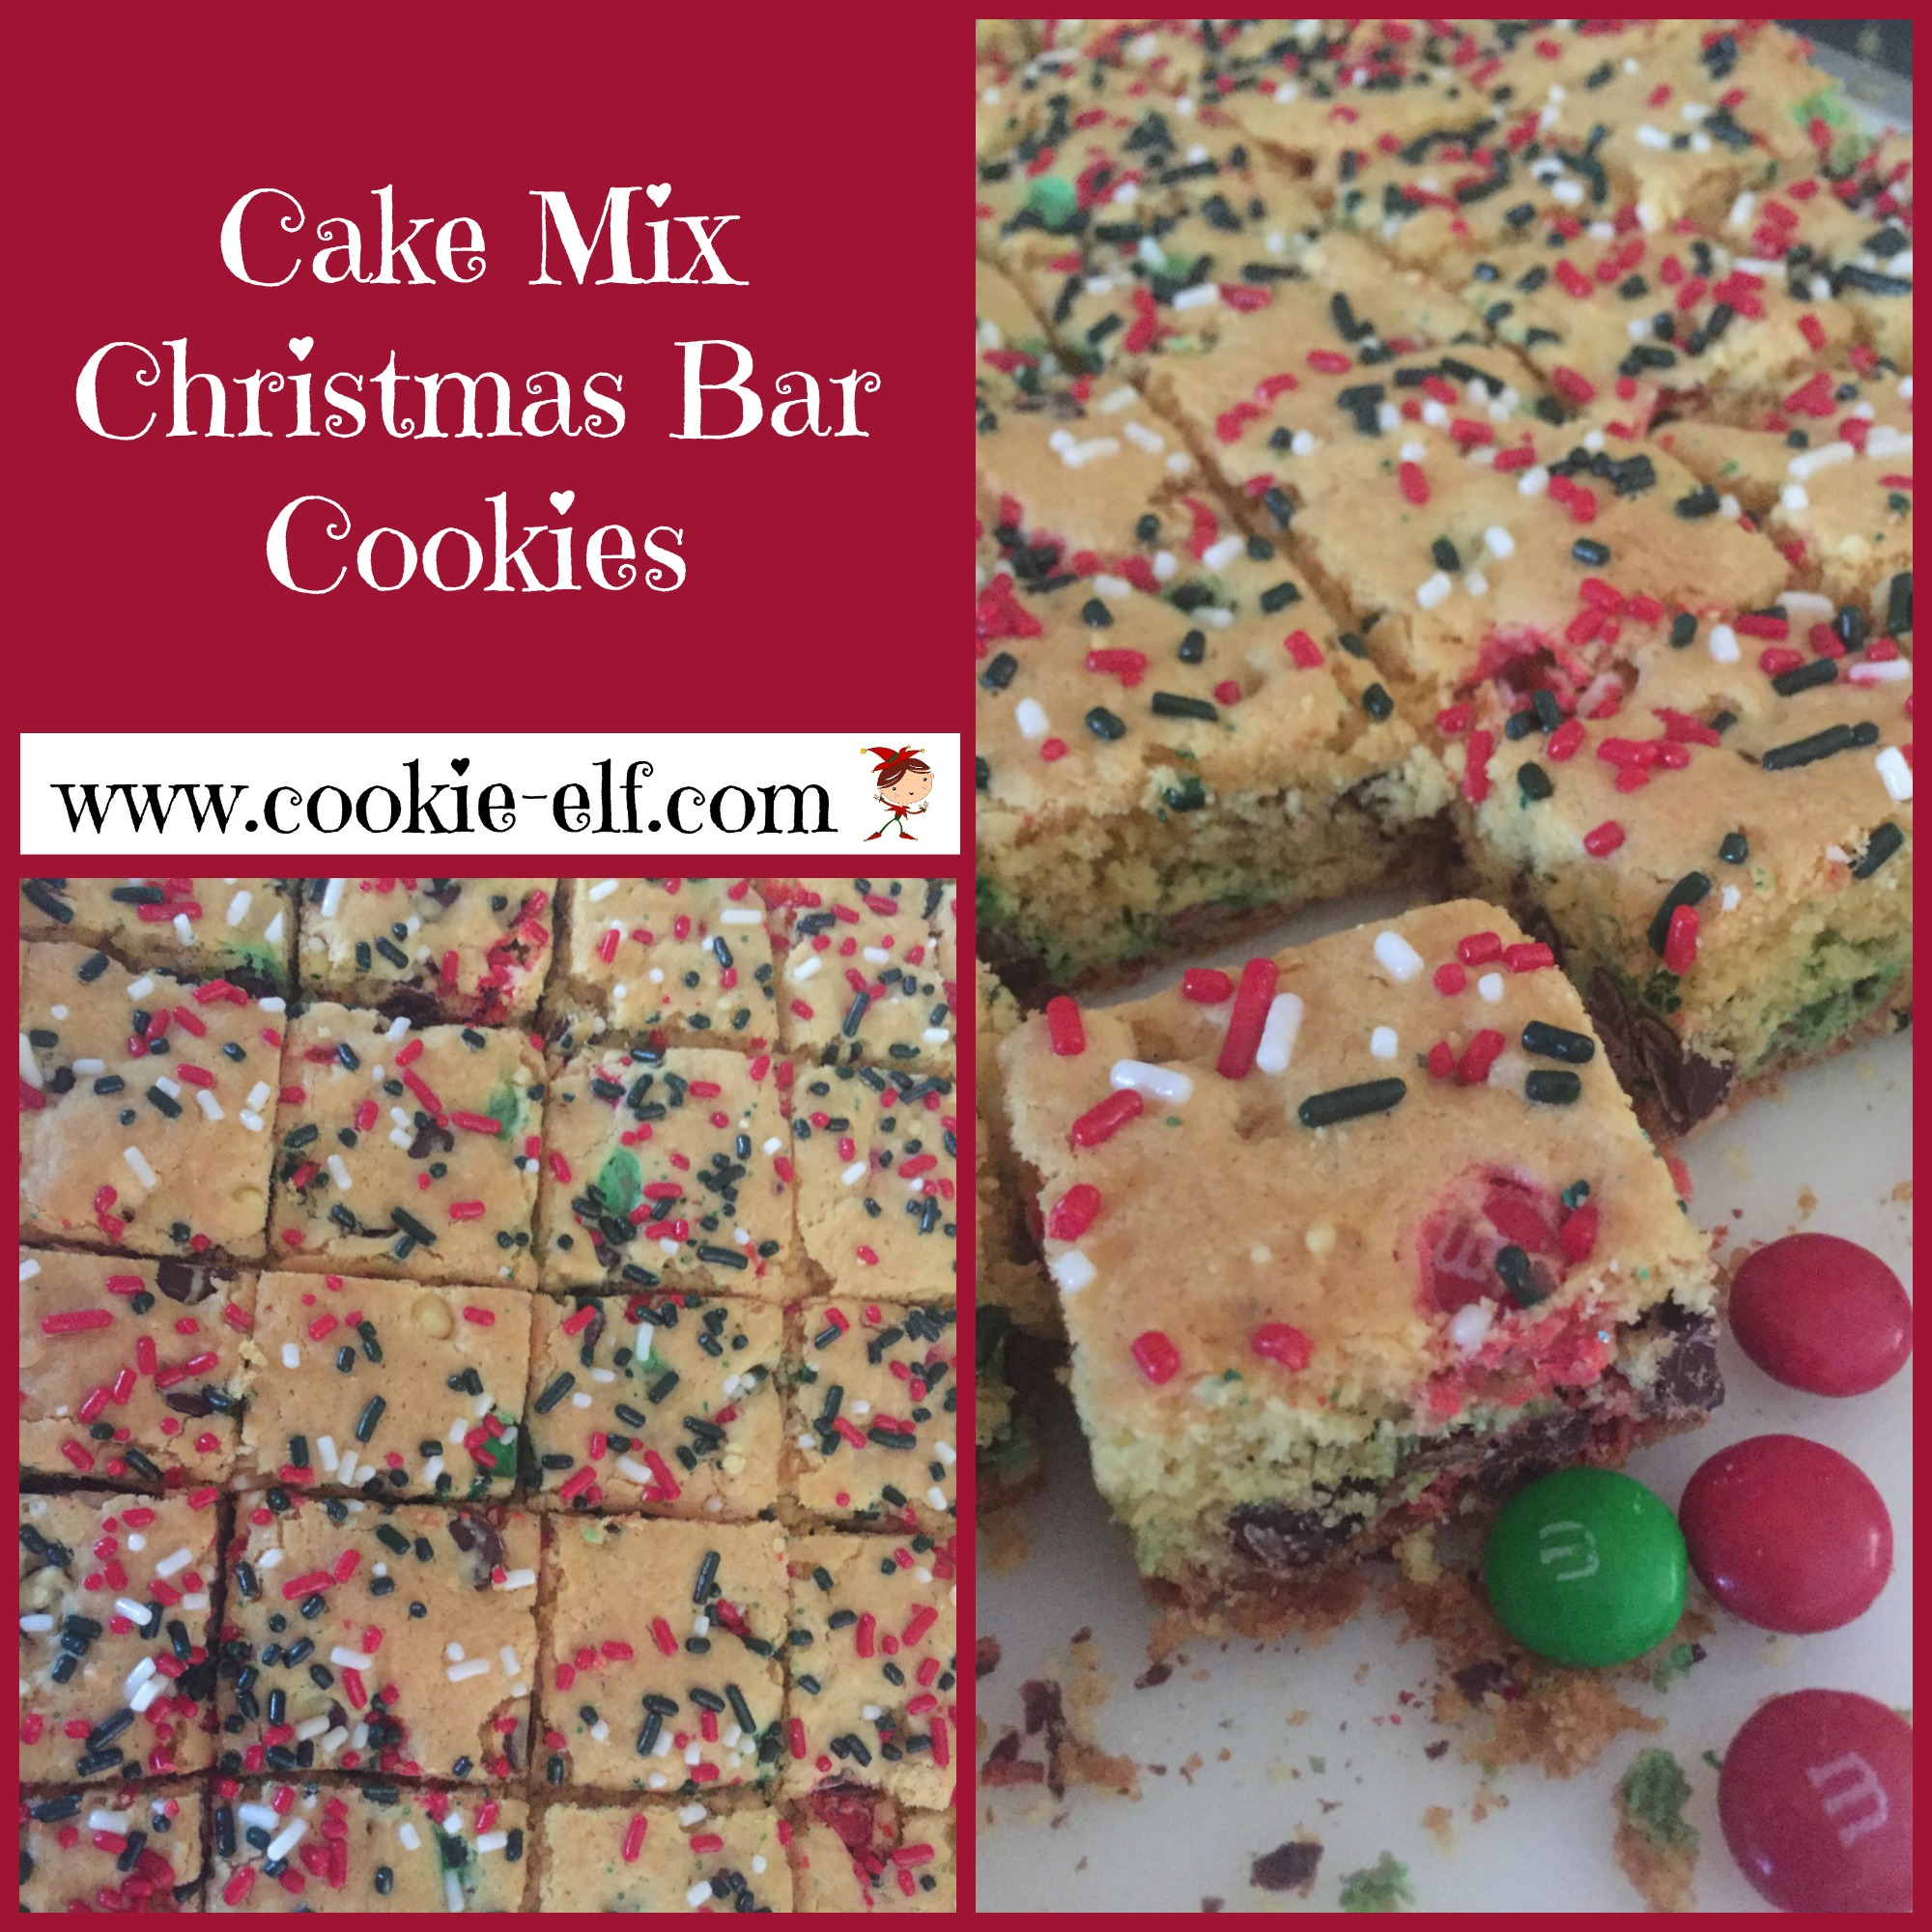 Cake Mix Christmas Bar Cookies with The Cookie Elf